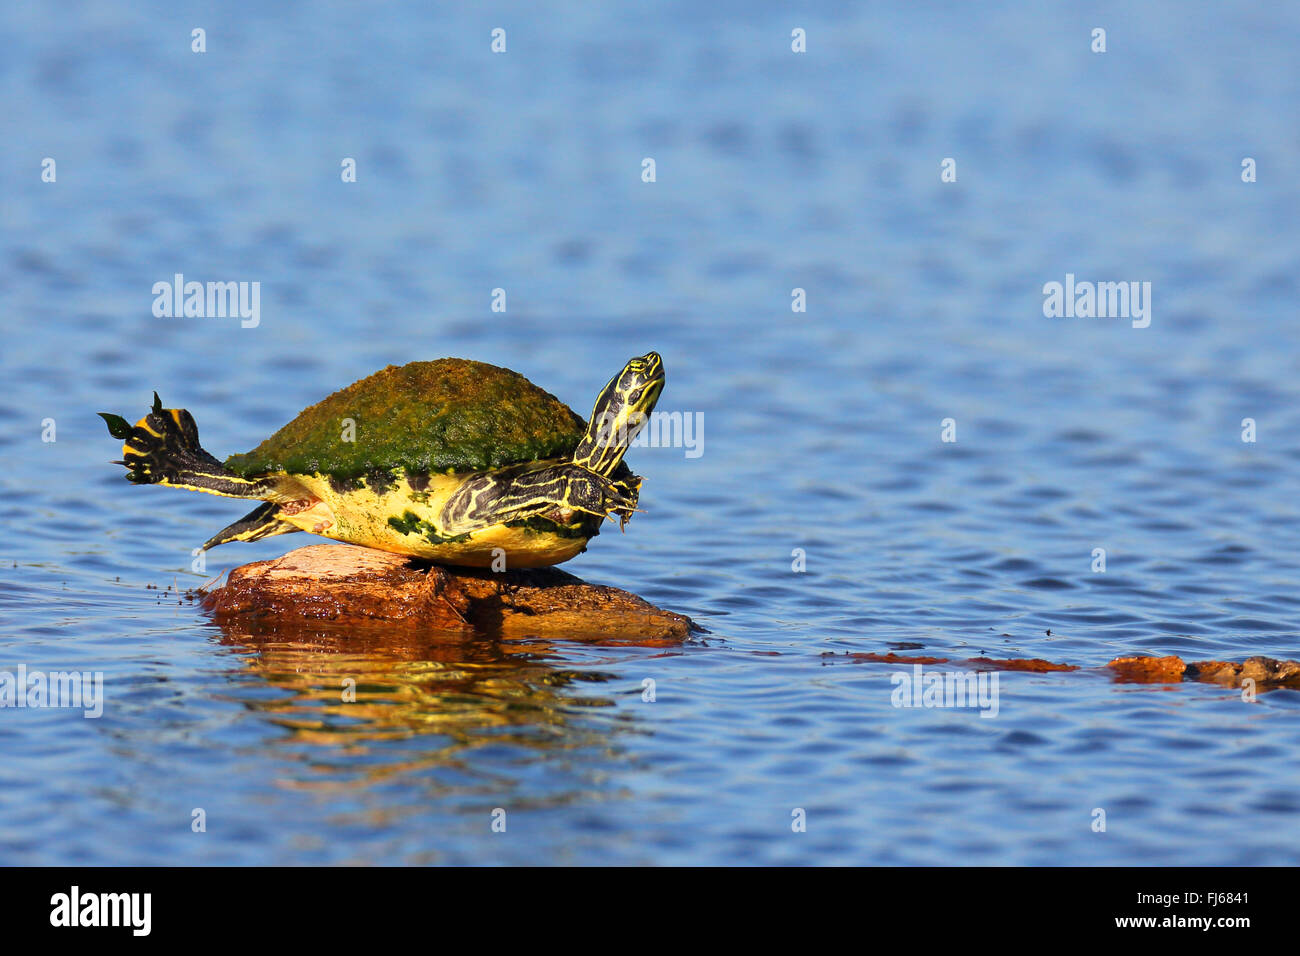 Florida redbelly turtle, Florida red-bellied turtle (Pseudemys rubriventris nelsoni, Chrysemys nelsoni, Pseudemys nelsoni), sunbathing on a stone, USA, Florida, Viera Wetlands Stock Photo